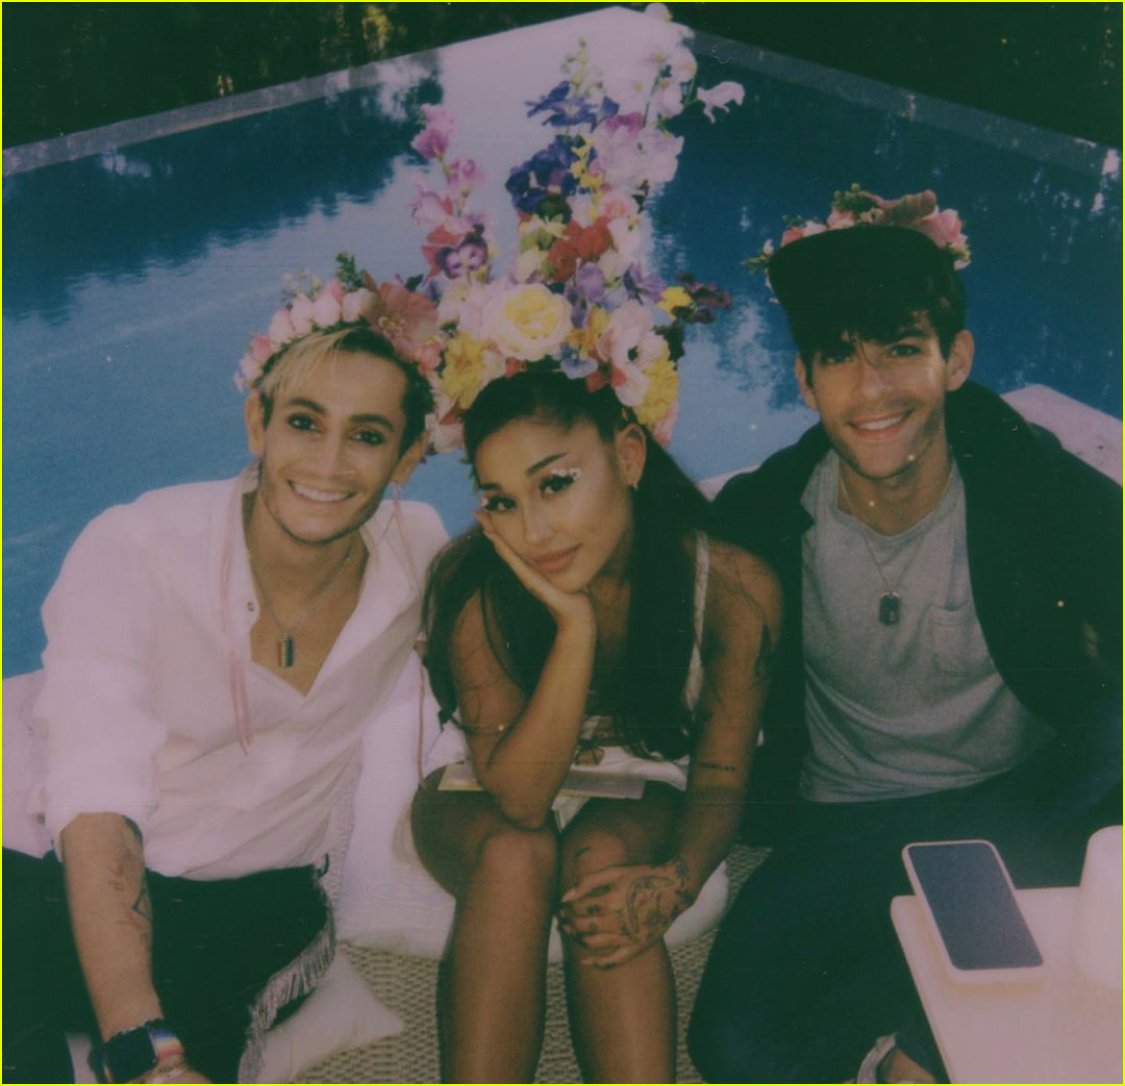 ariana grande gets a kiss from dalton gomez midsommar party 11